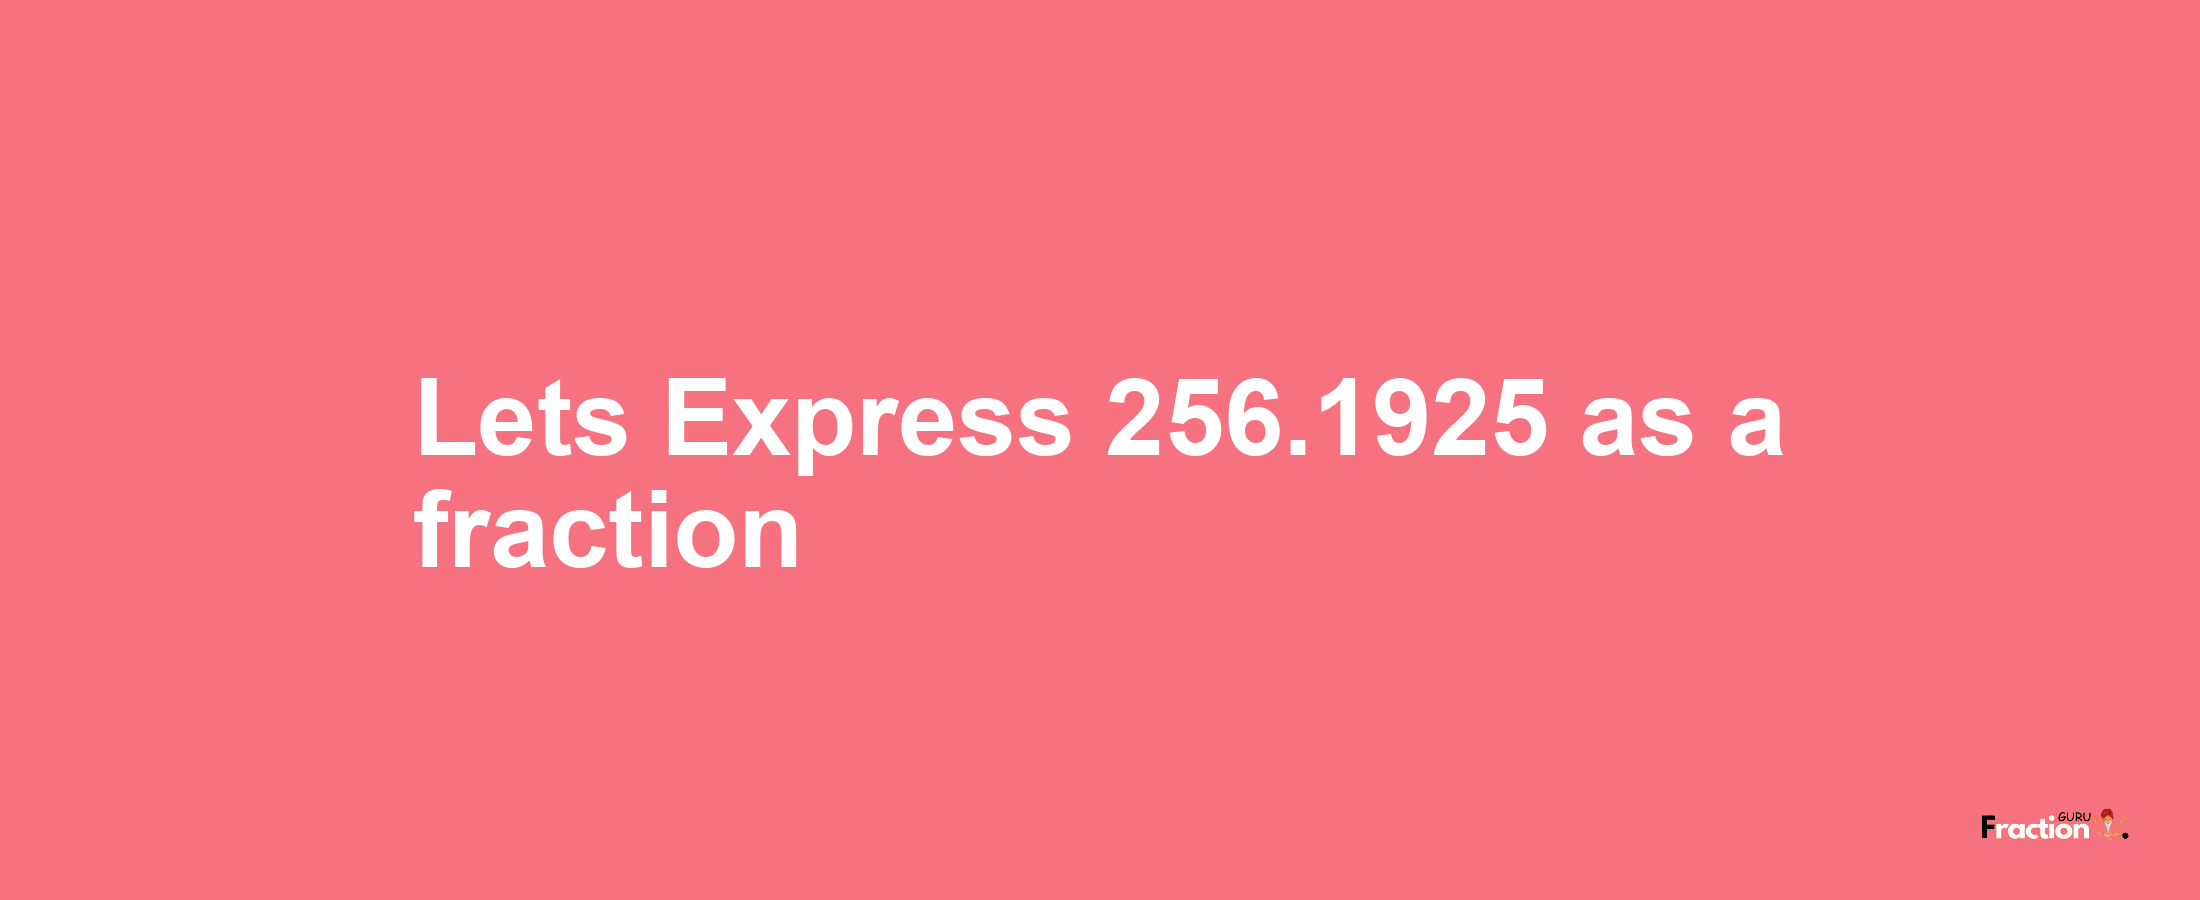 Lets Express 256.1925 as afraction